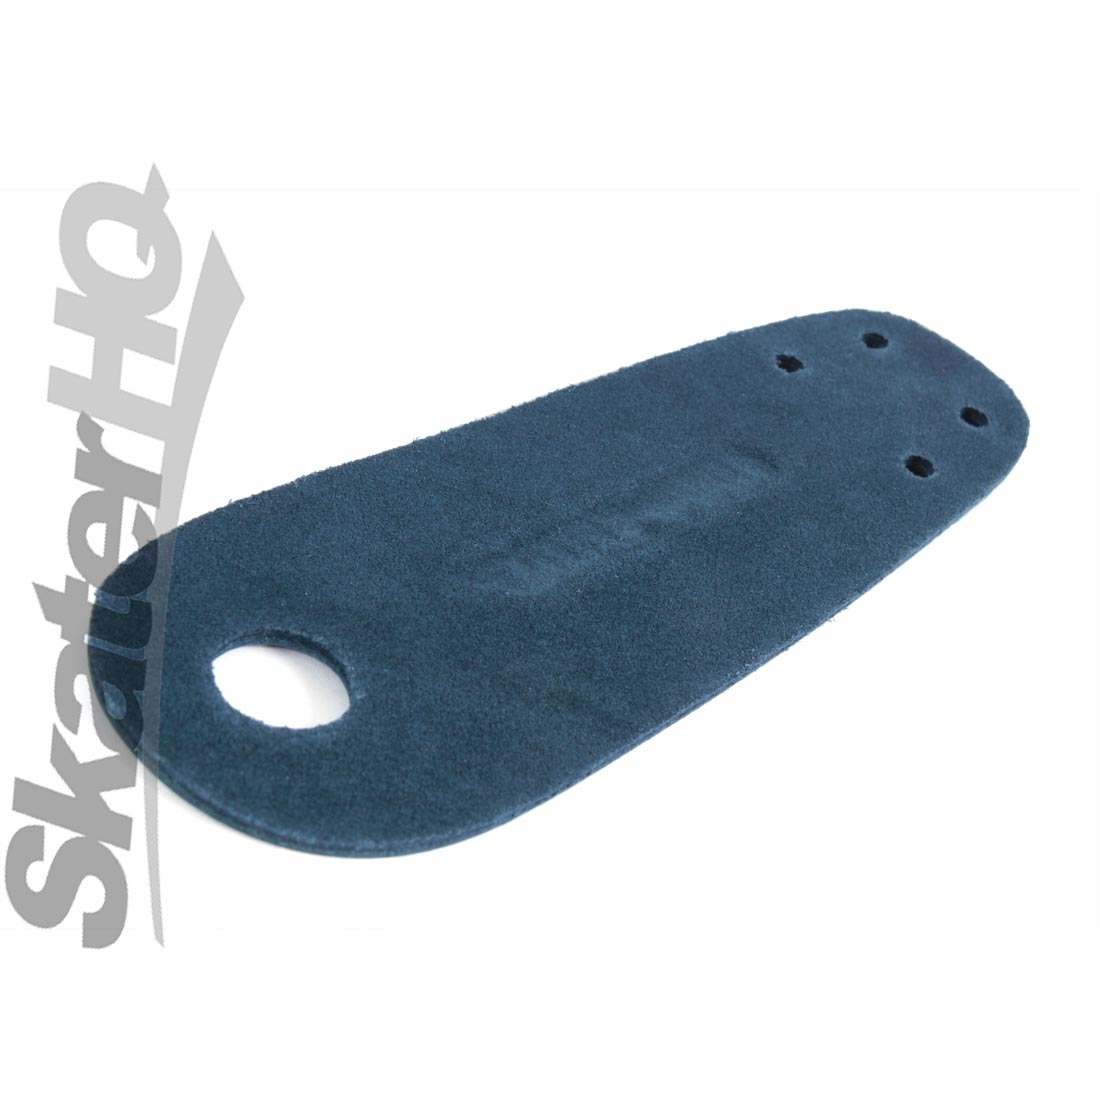 Sure-Grip Toe Guards - Navy Blue Roller Skate Hardware and Parts